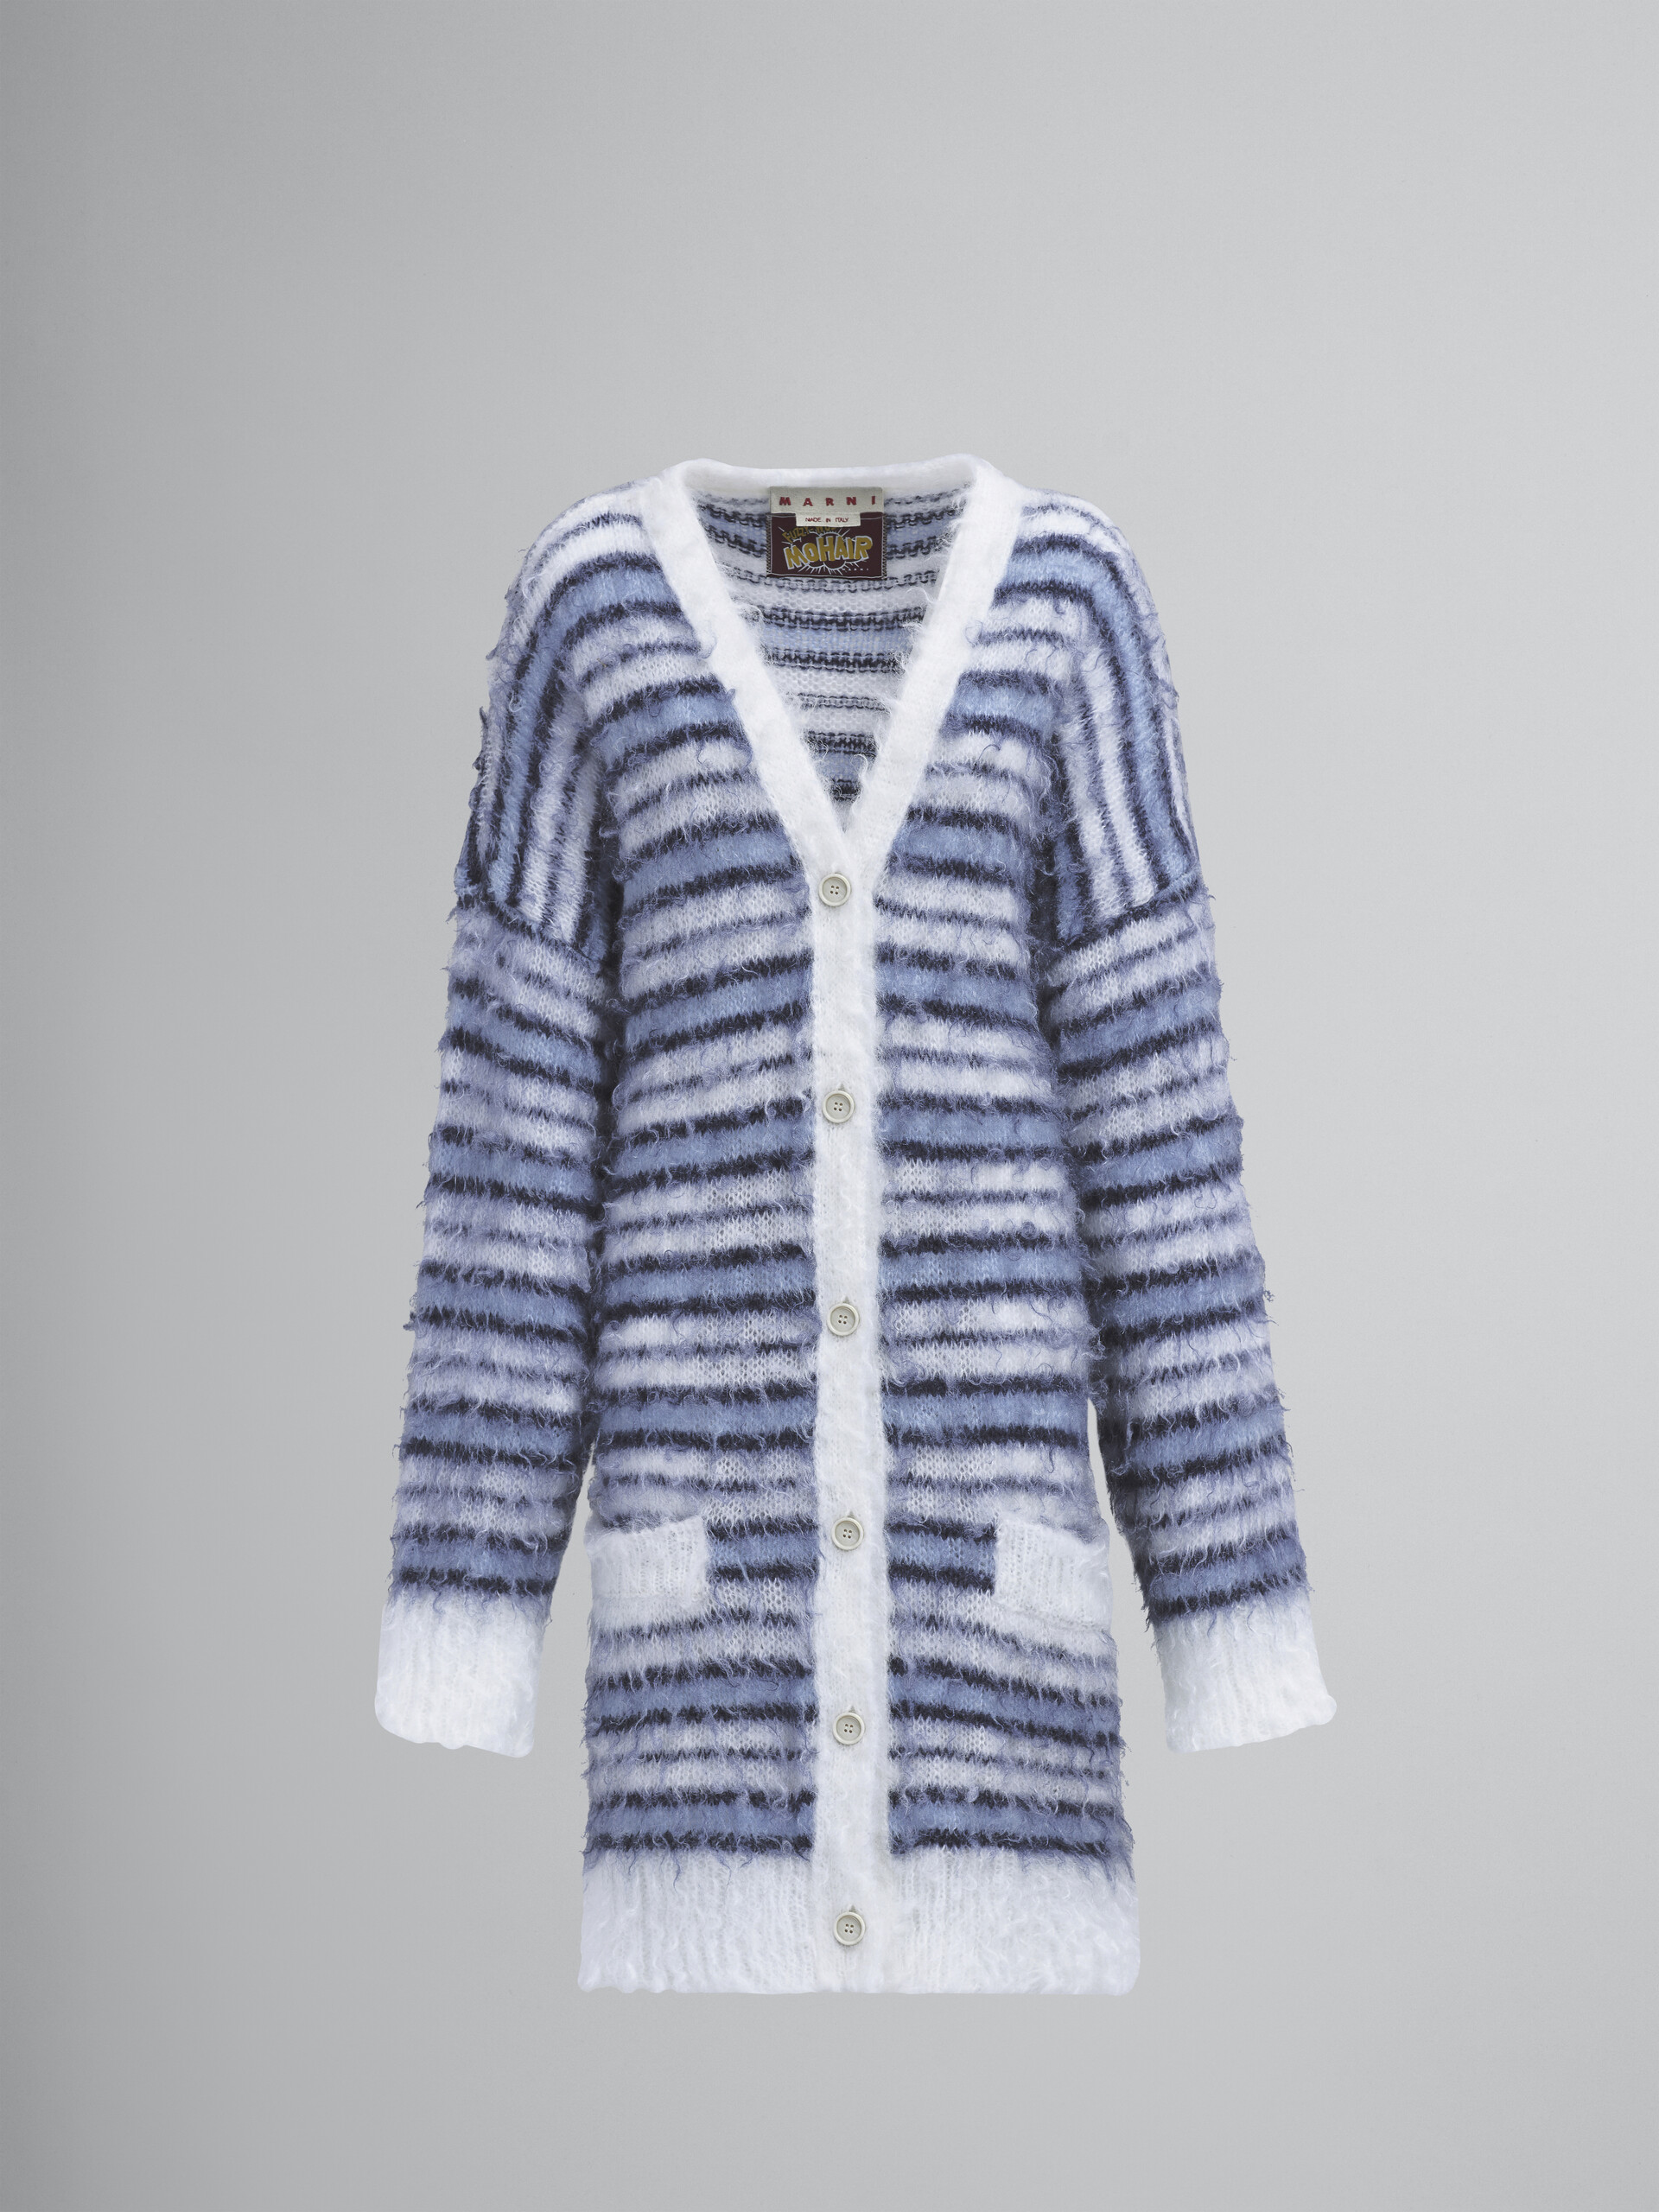 Striped Iconic mohair long cardigan - Pullovers - Image 1